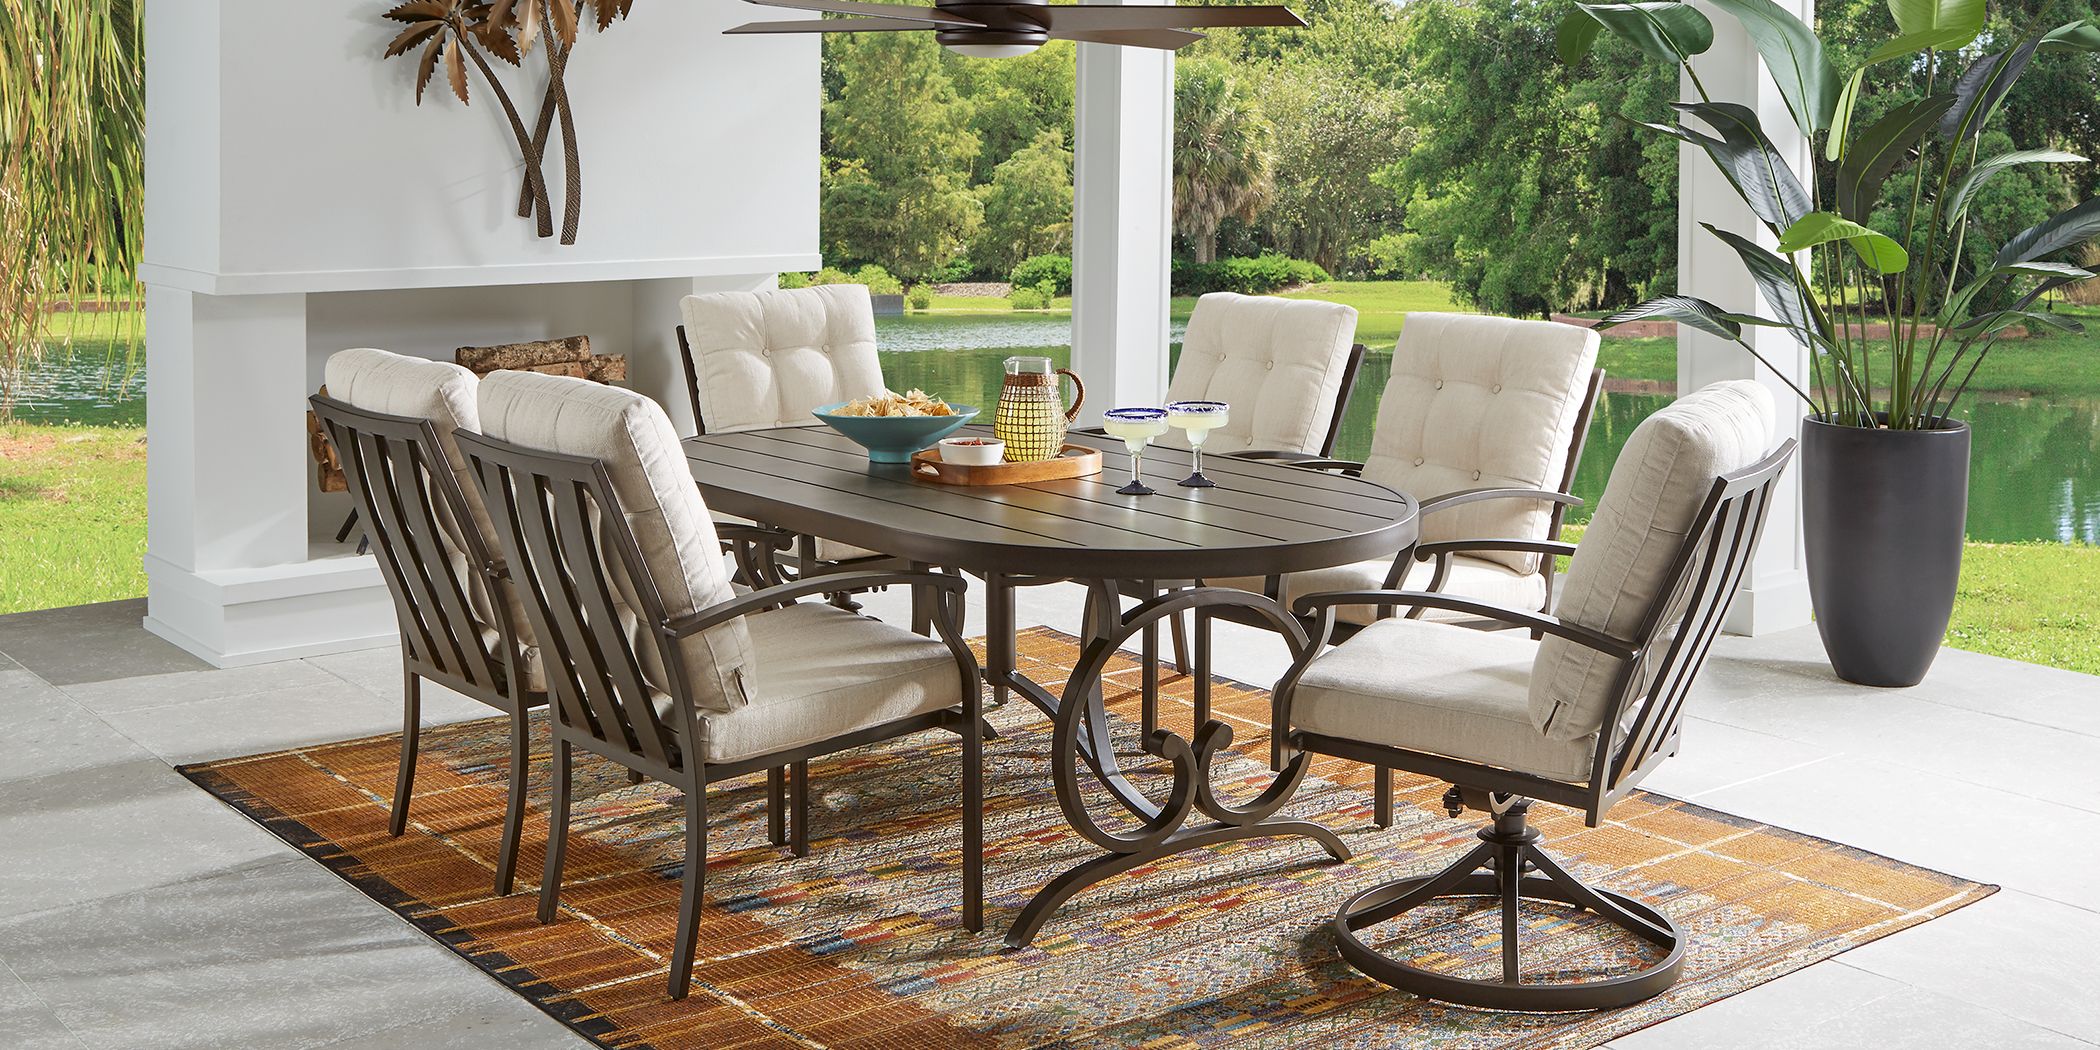 patio dining sets at home depot